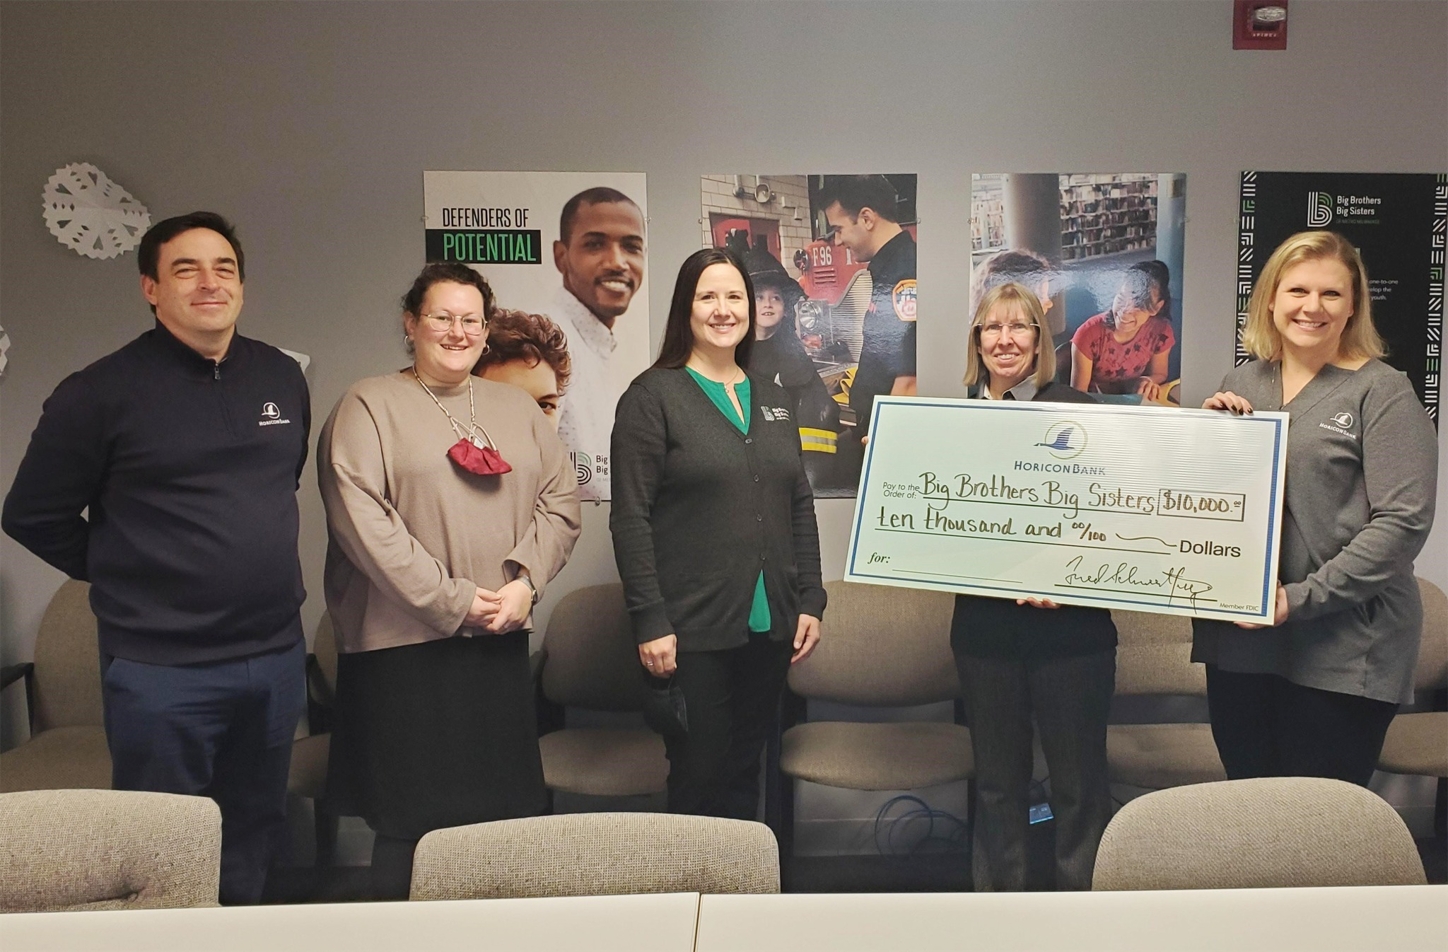 Horicon Bank donates $10,000 to Big Brothers Big Sisters of Greater Milwaukee.